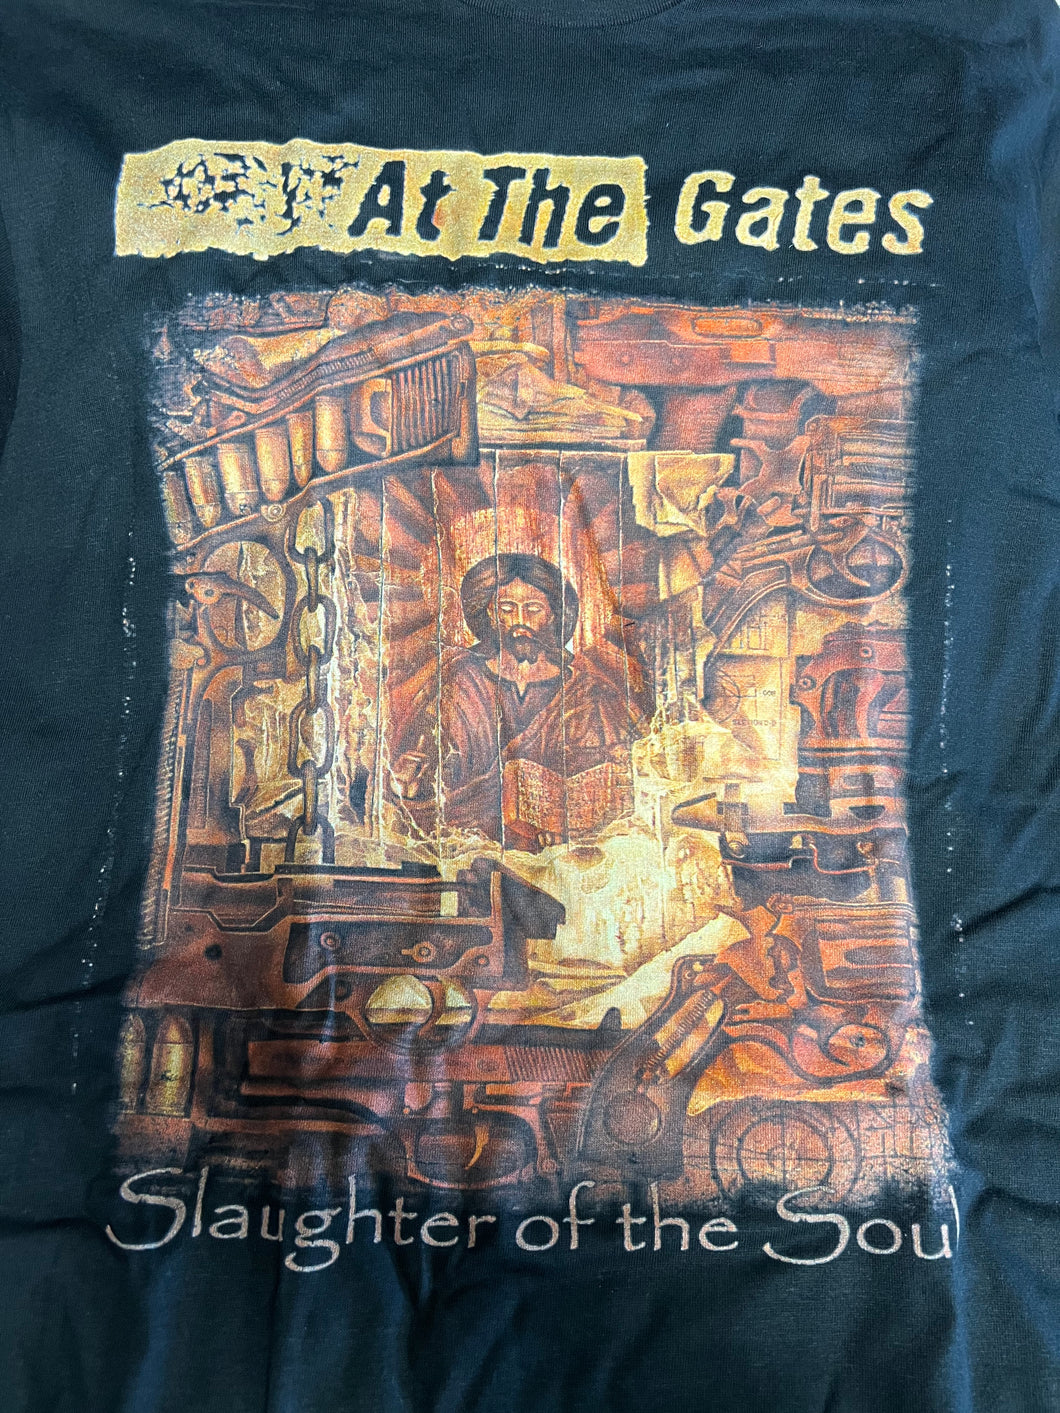 At The Gates  SHORT SLEEVE SHIRT (PLEASE EMAIL/CONTACT REGARDING SIZE AVAILABILITY)